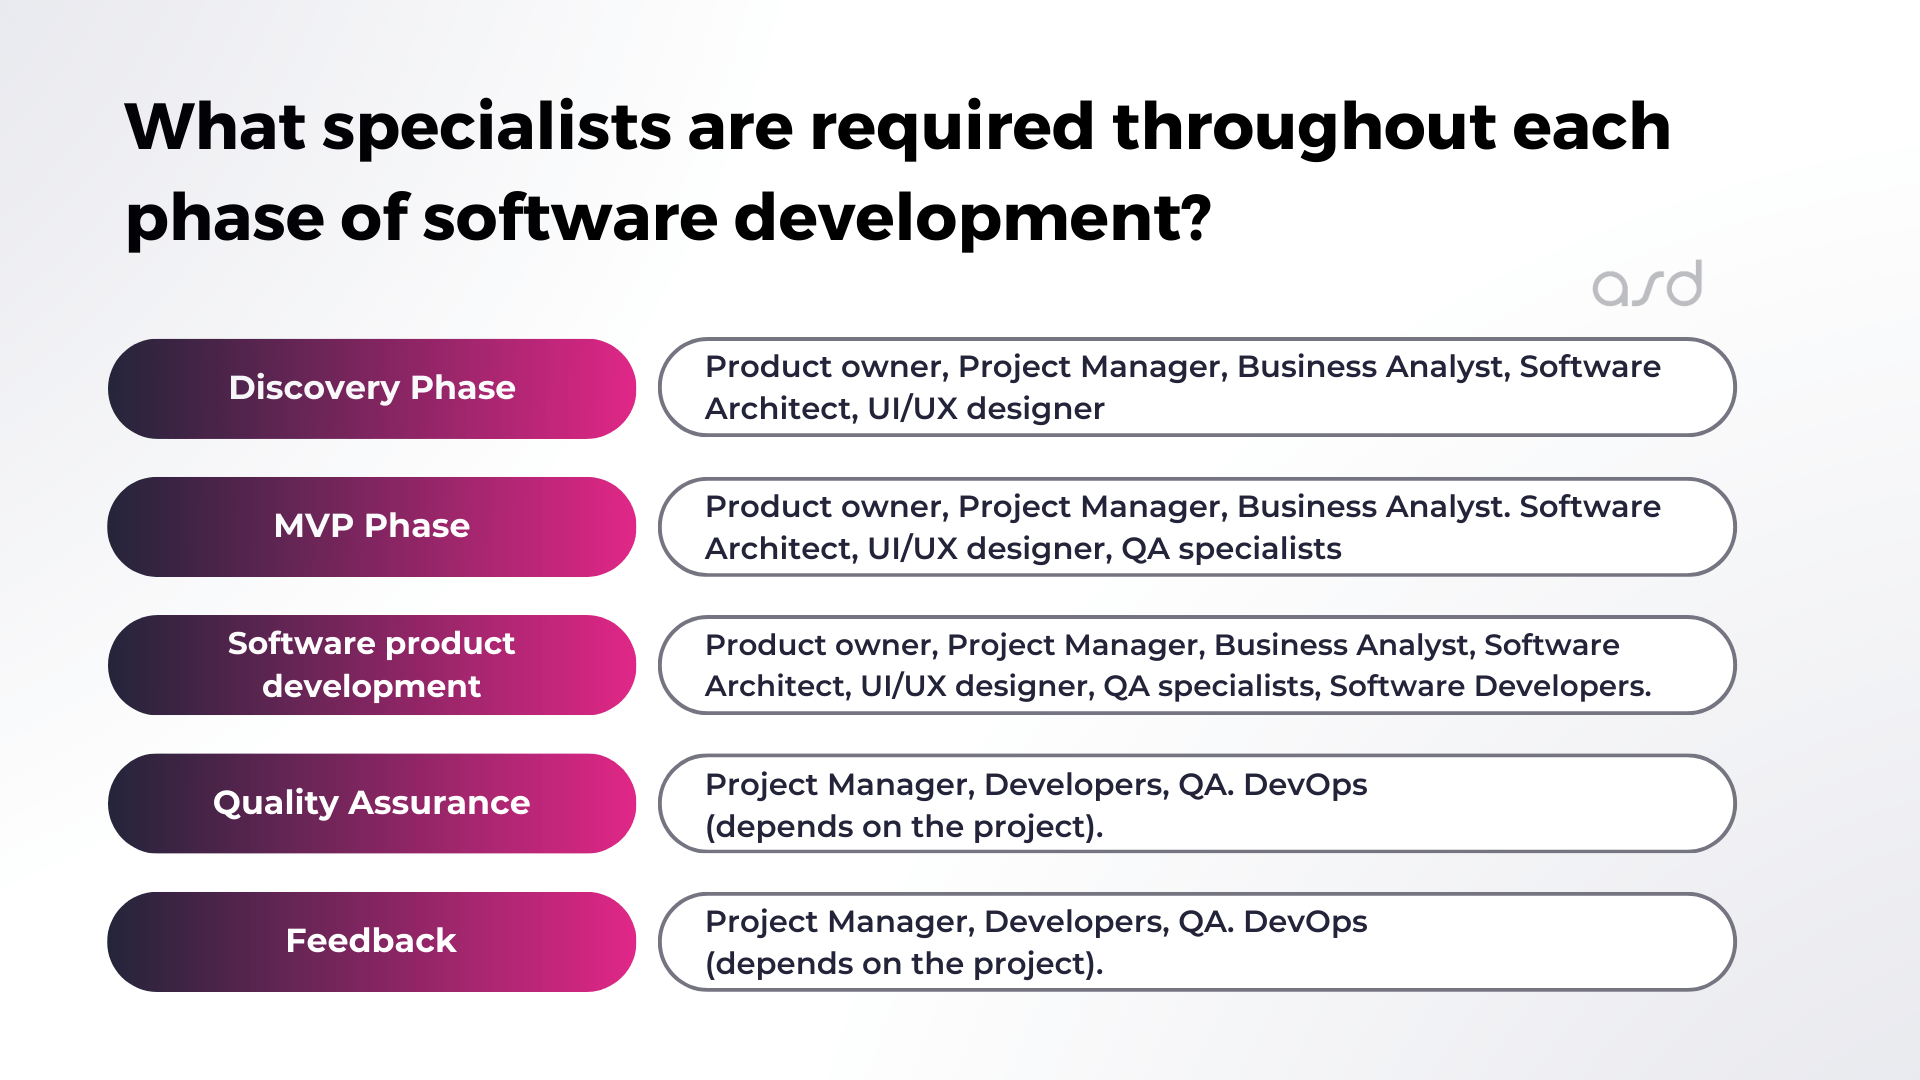 What specialists are required throughout each phase of software development in the Agile team?